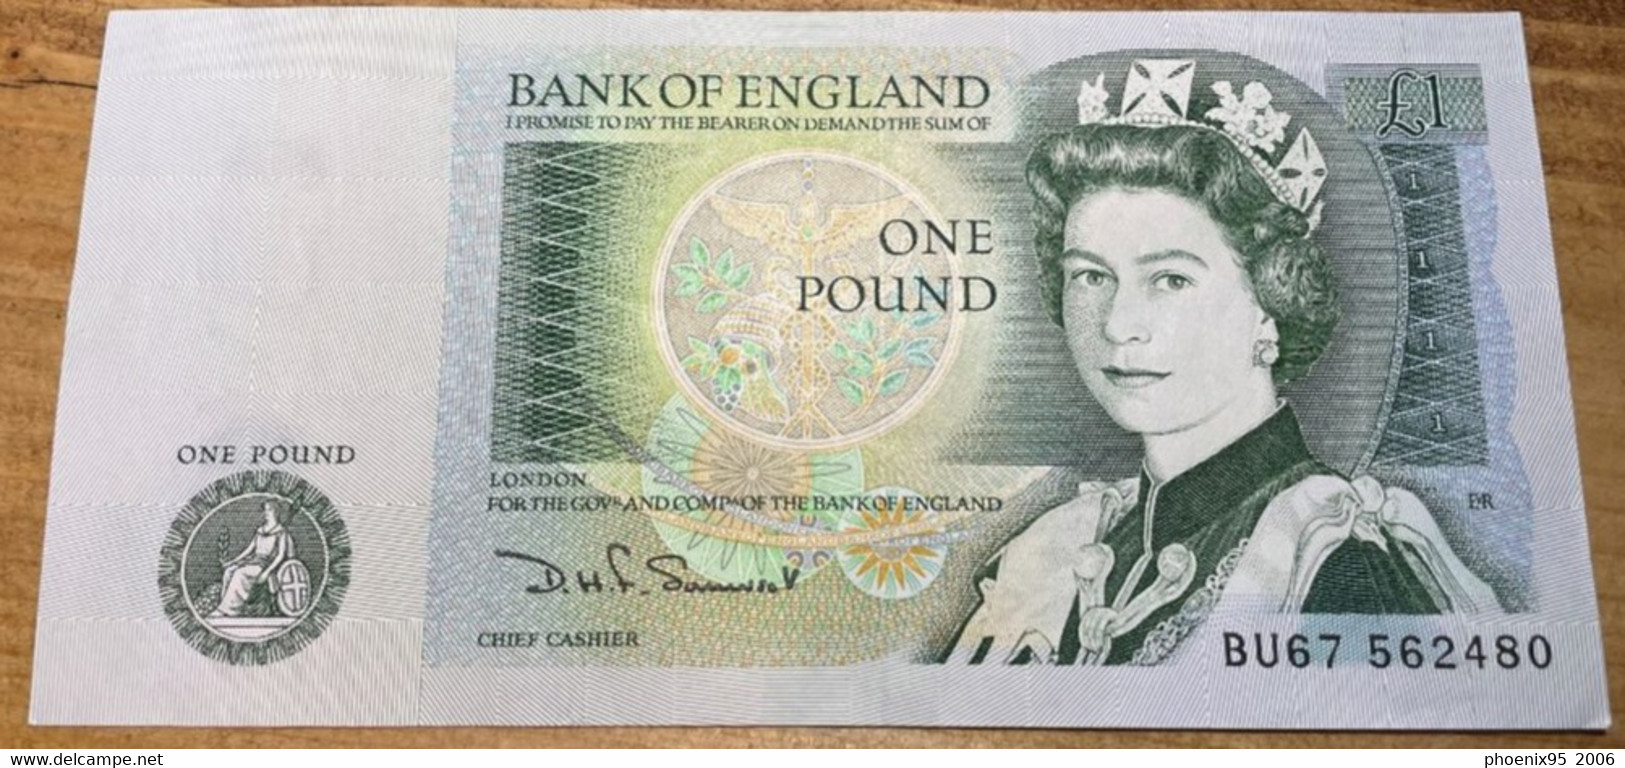 Bank Of England £1 Note (BU67 Series, DHF Somerset) - Excellent Condition - 1 Pound